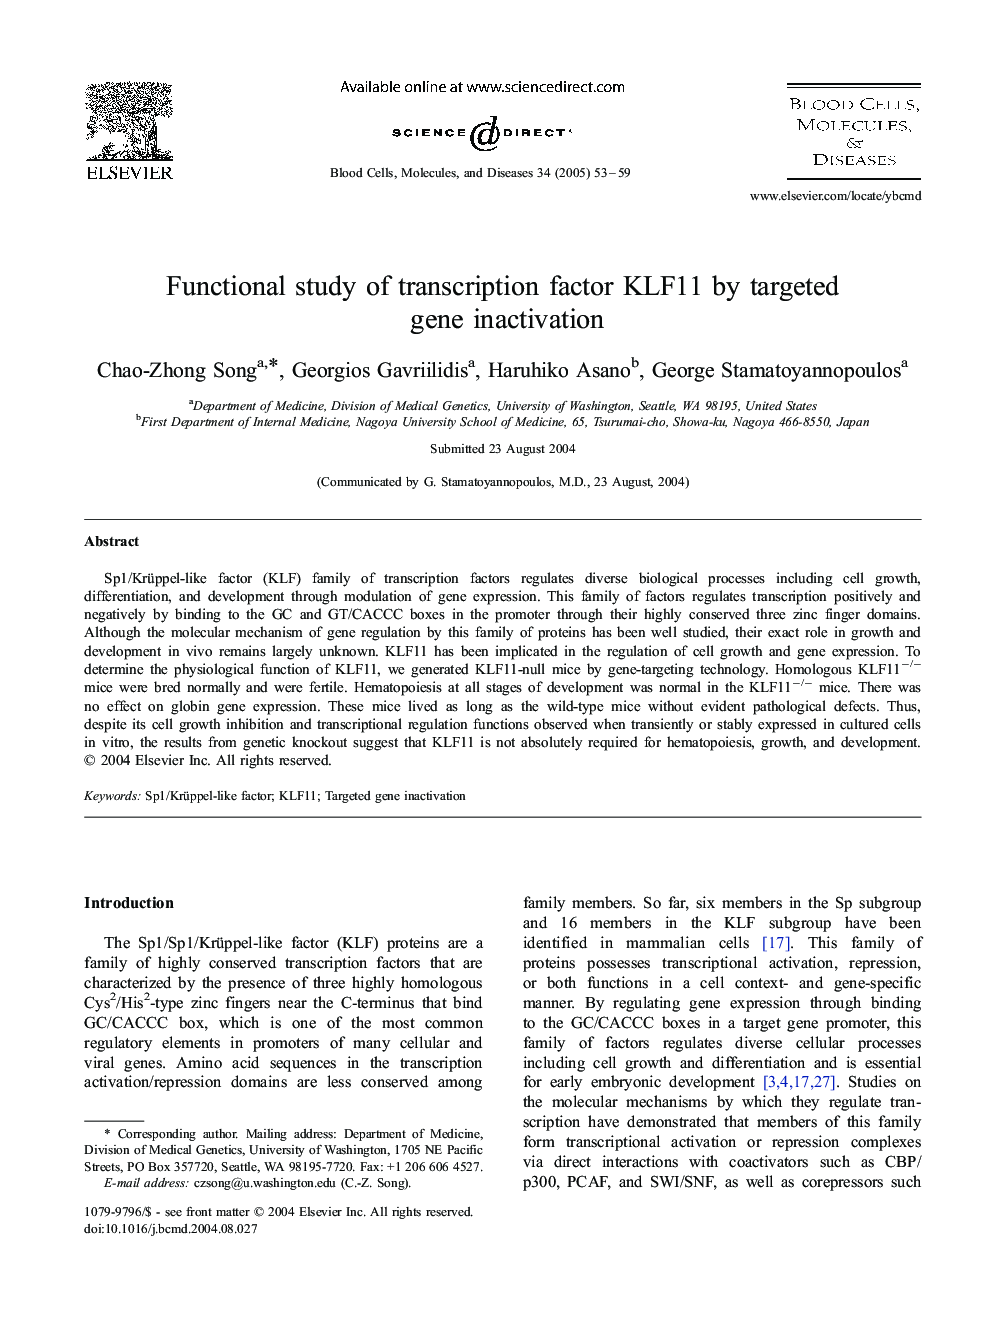 Functional study of transcription factor KLF11 by targeted gene inactivation